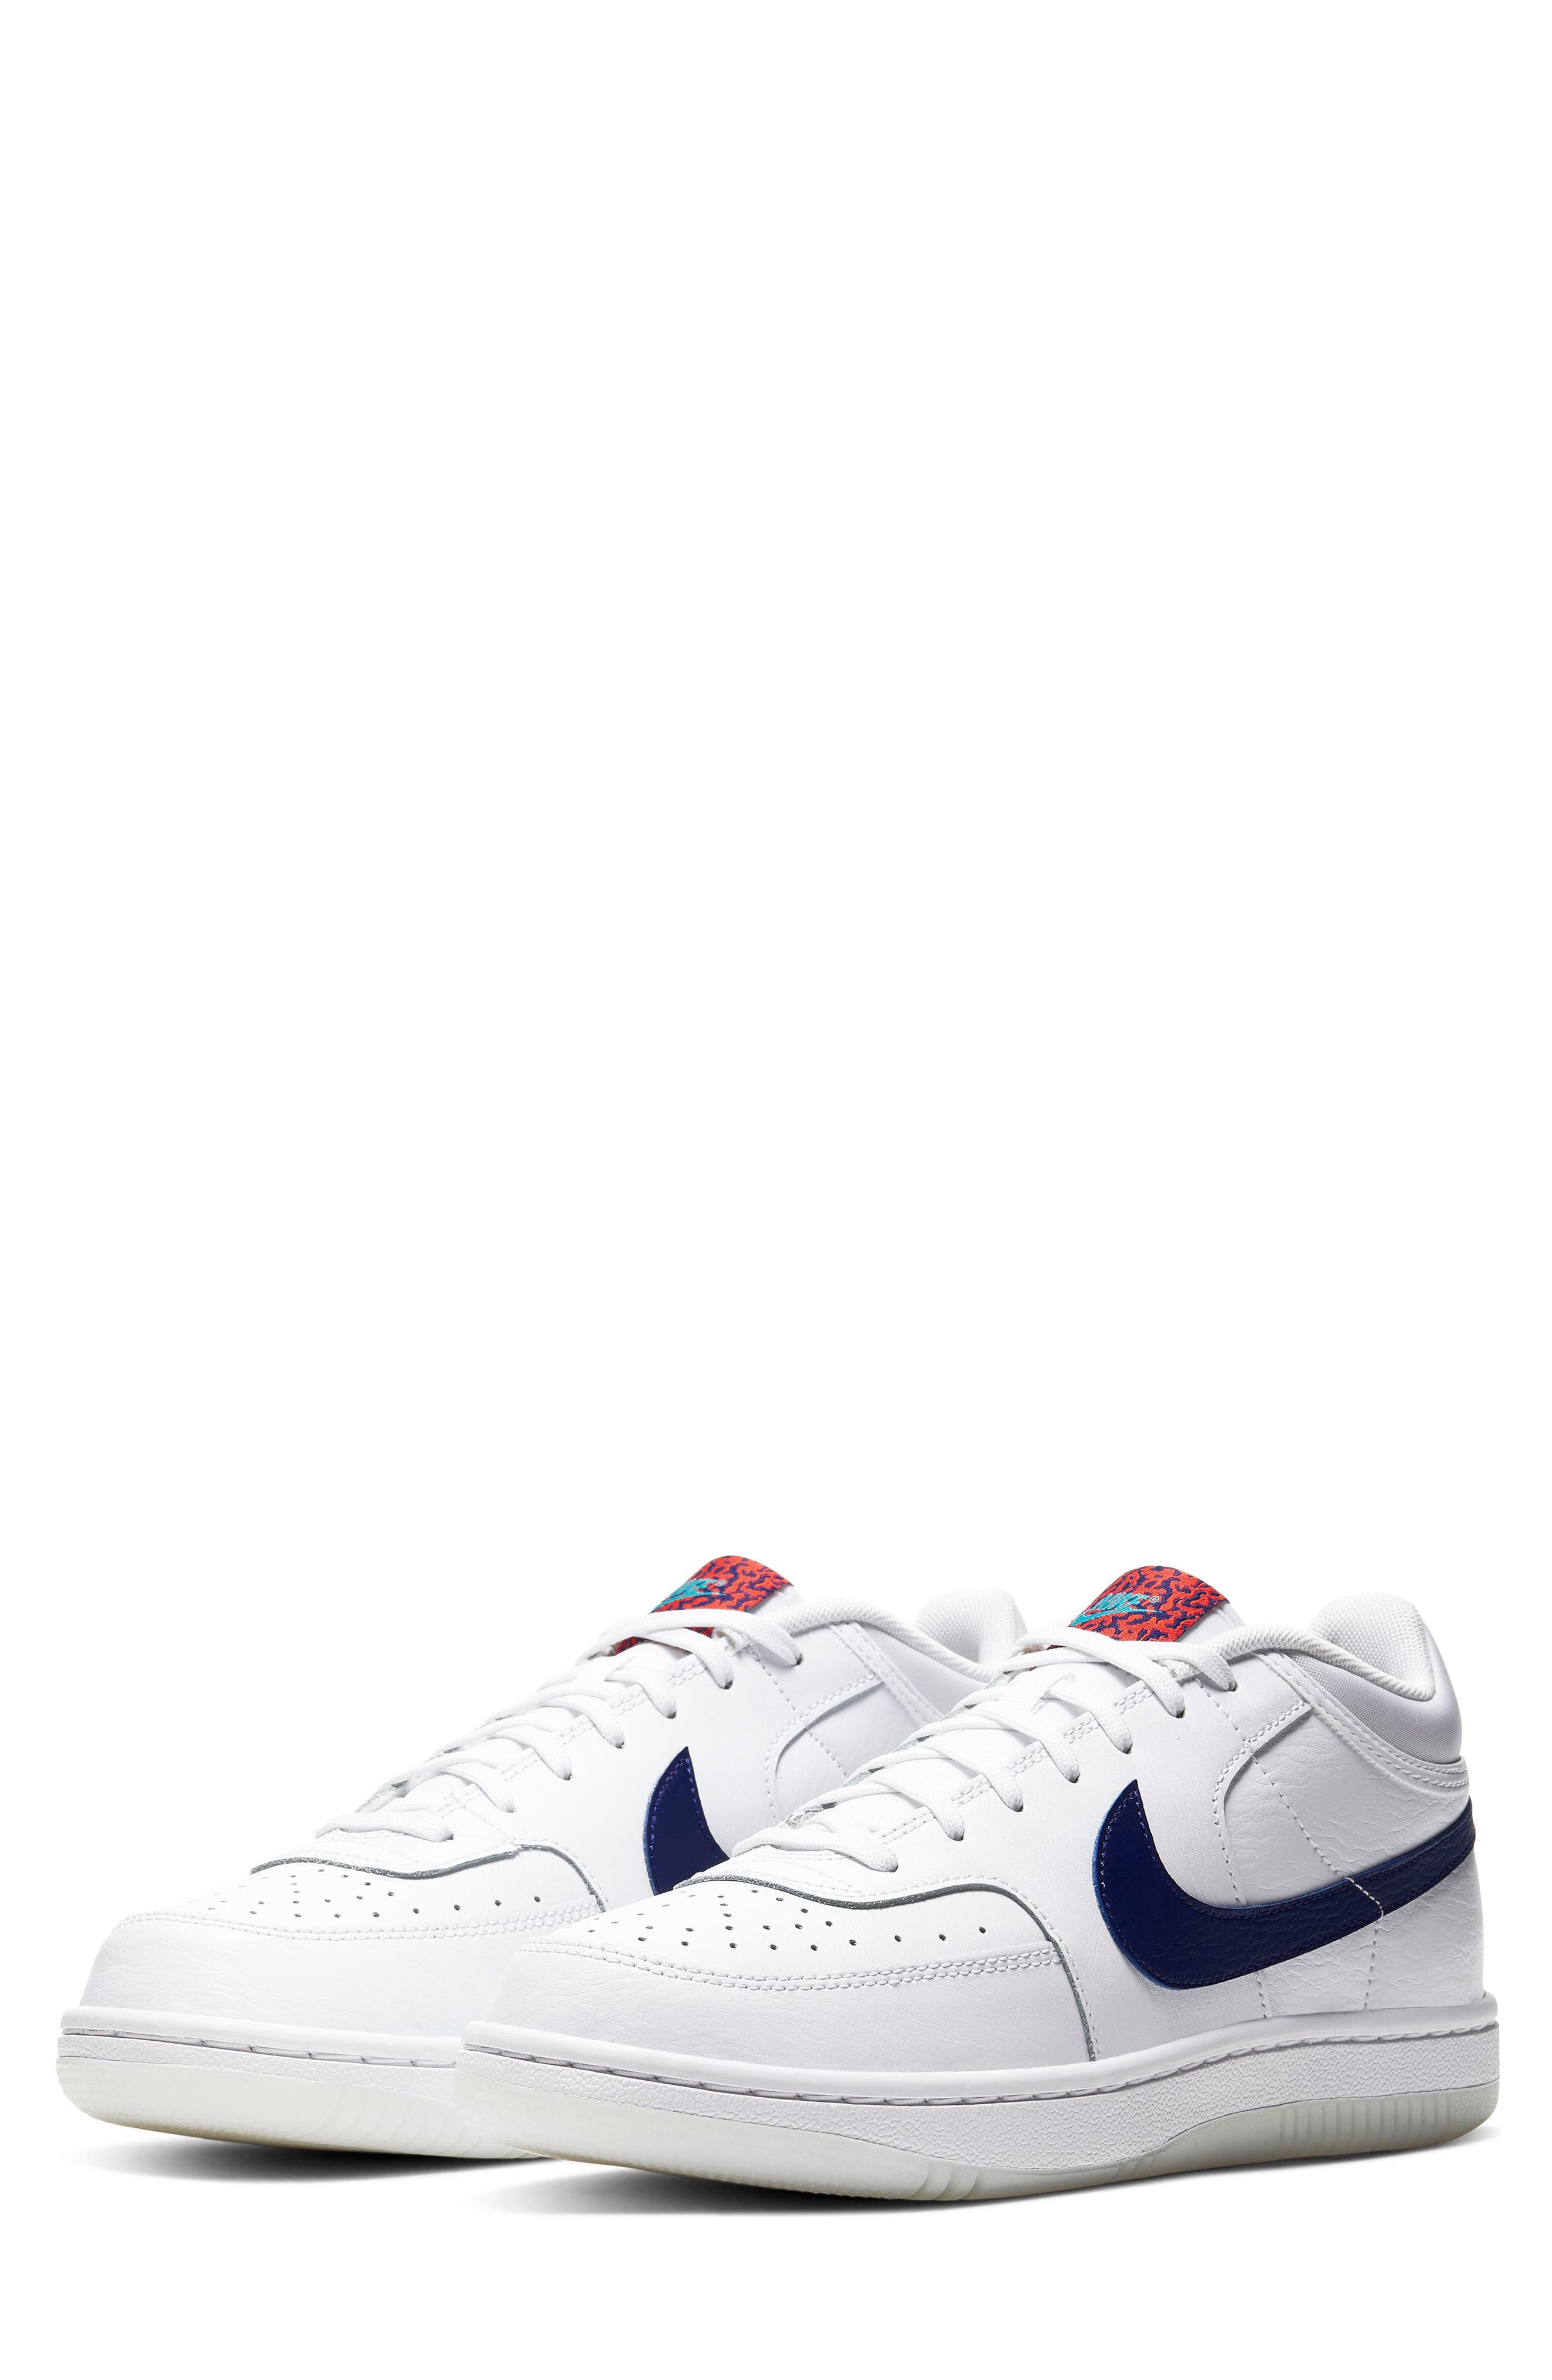 nike mens shoes under $3